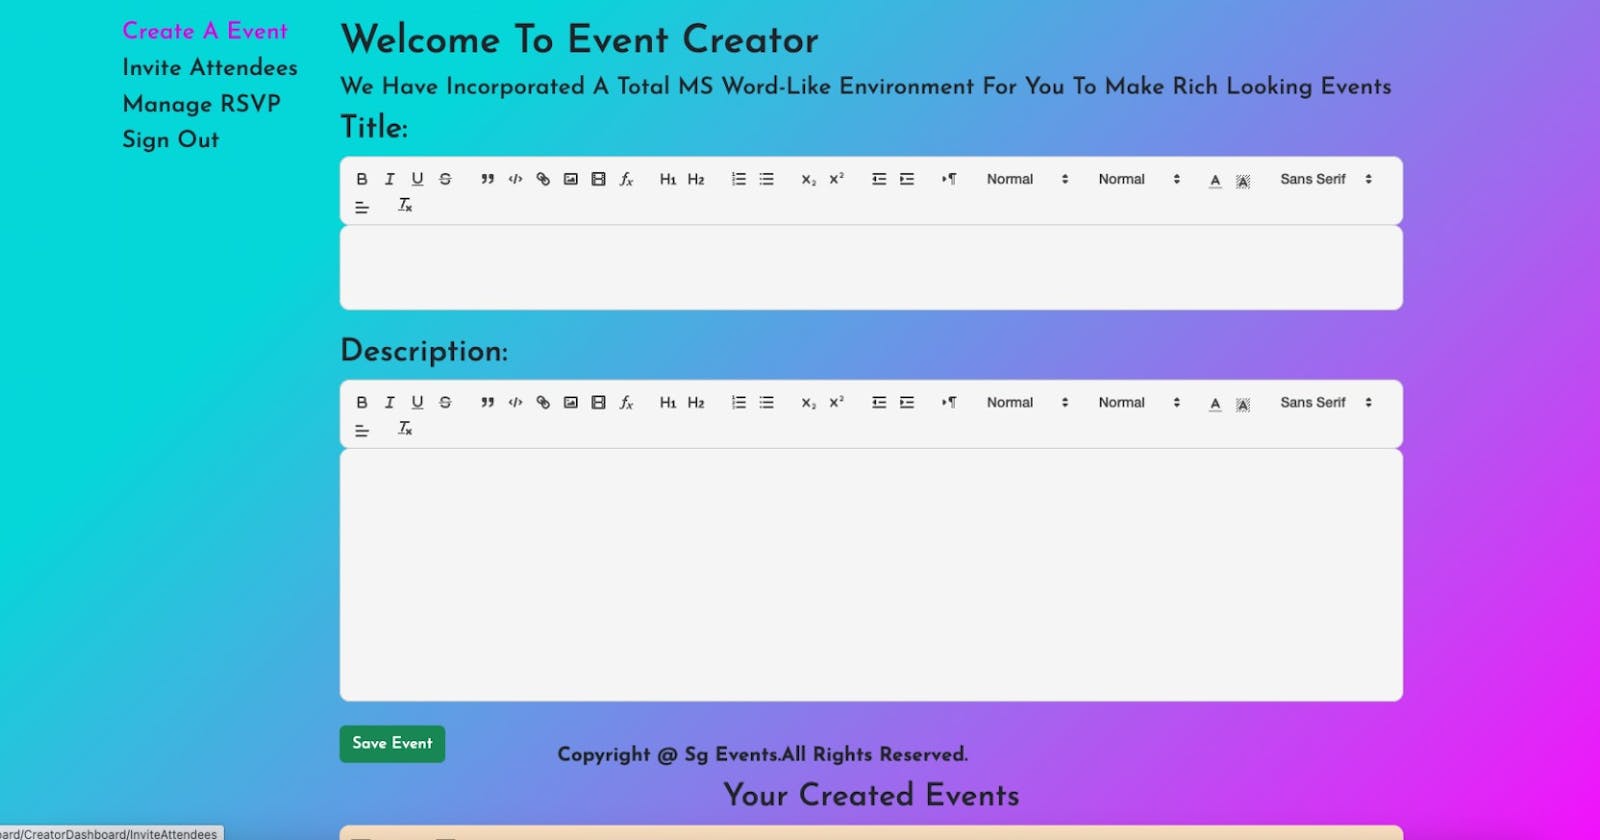 Revolutionize Your Event Planning with the World's Simplest and Fastest Web App - SG Events